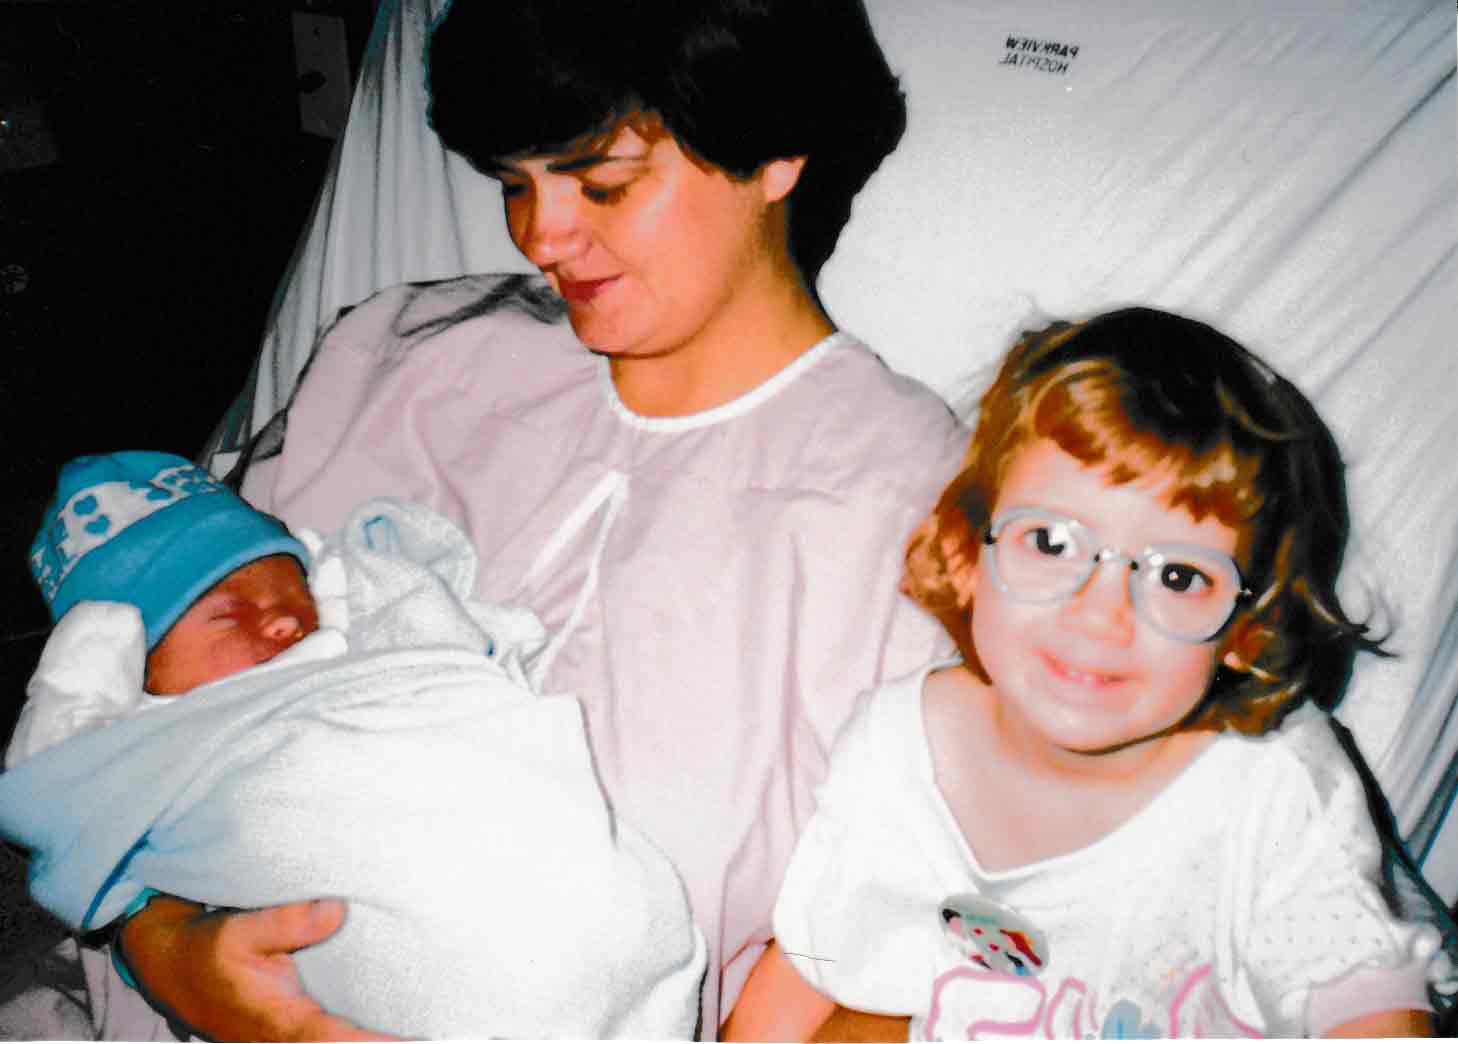 Lisa-Marie and her children, Marie and Josh.